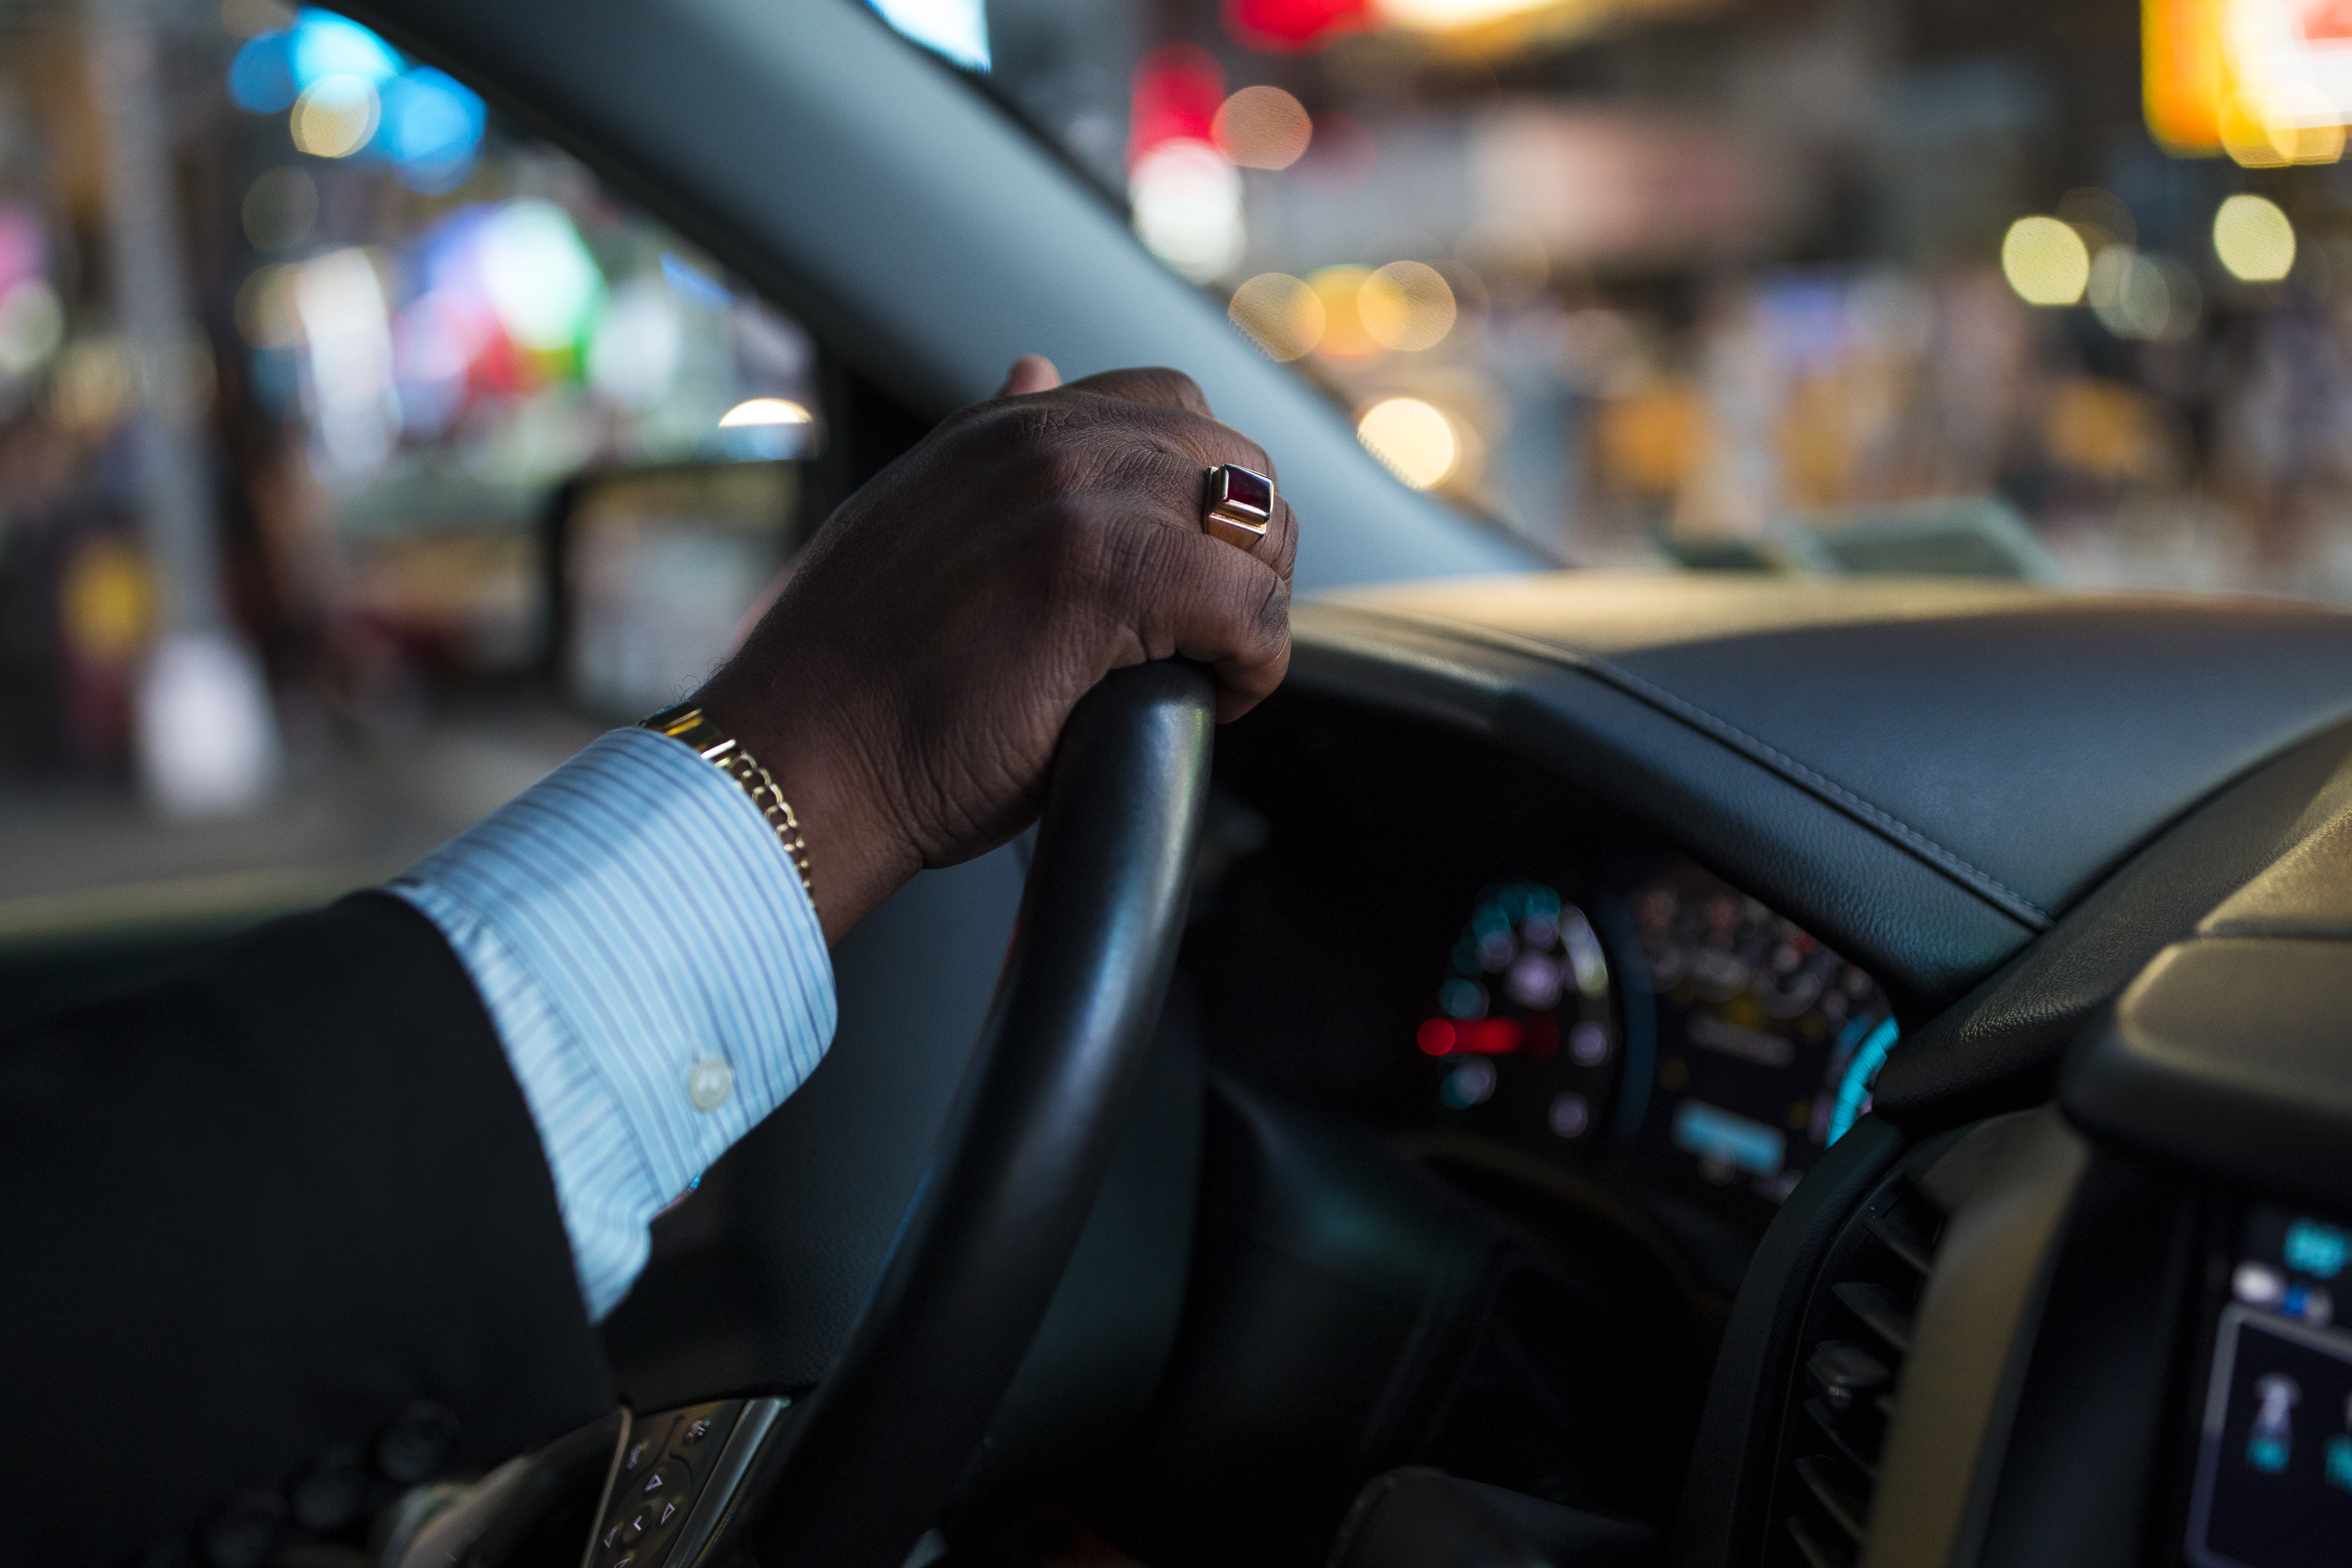 A man’s hand on a steering wheel inside a car at night.